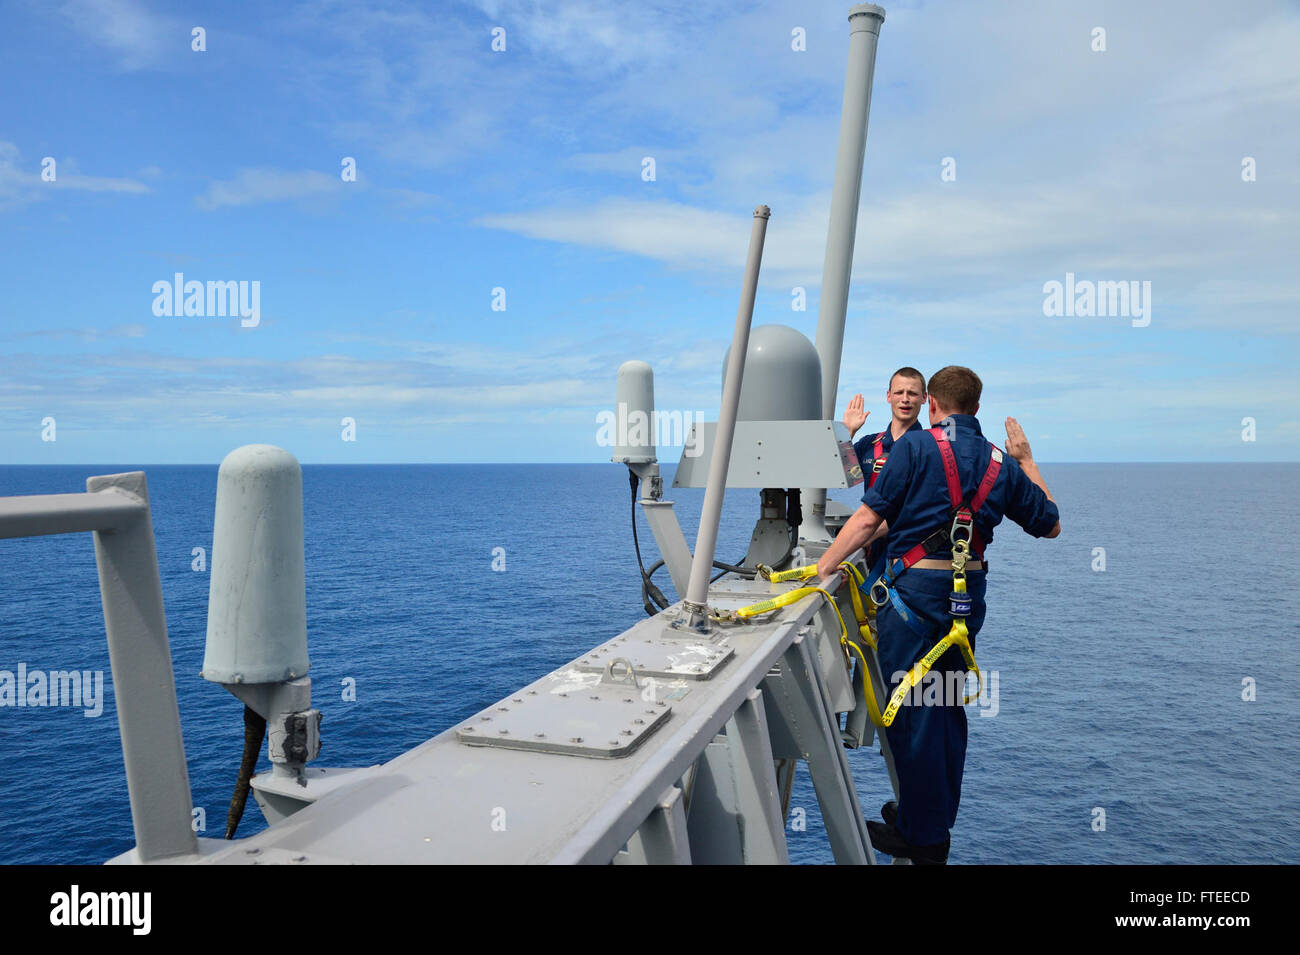 140520-N-AT101-744: INDIAN OCEAN (May 20, 2014) – Electronics Technician 2nd Class Max Lanz, left, recites the oath of reenlistment on the 0-9 level of the guided-missile destroyer USS Nitze (DDG 94). Nitze, homeported in Norfolk, Va., is on a scheduled deployment supporting maritime security operations and theater security cooperation efforts in the U.S. 6th Fleet area of operations. (U.S. Navy photo by Mass Communication Specialist 1st Class Maddelin Angebrand/Released) Stock Photo